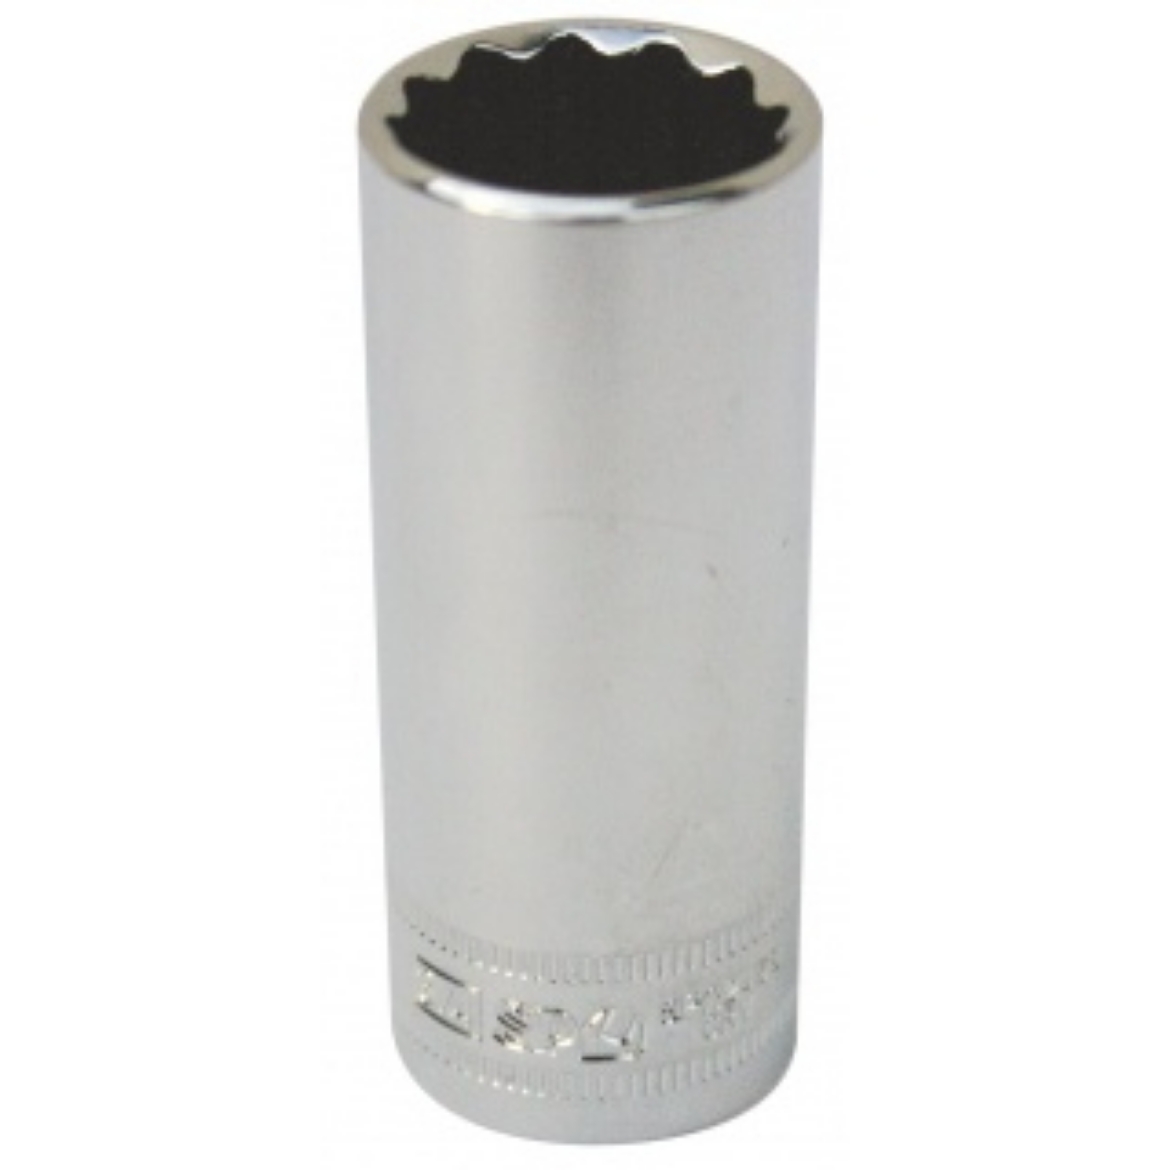 Picture of SOCKET DEEP 3/8"DR 12PT SAE 11/16" SP TOOLS